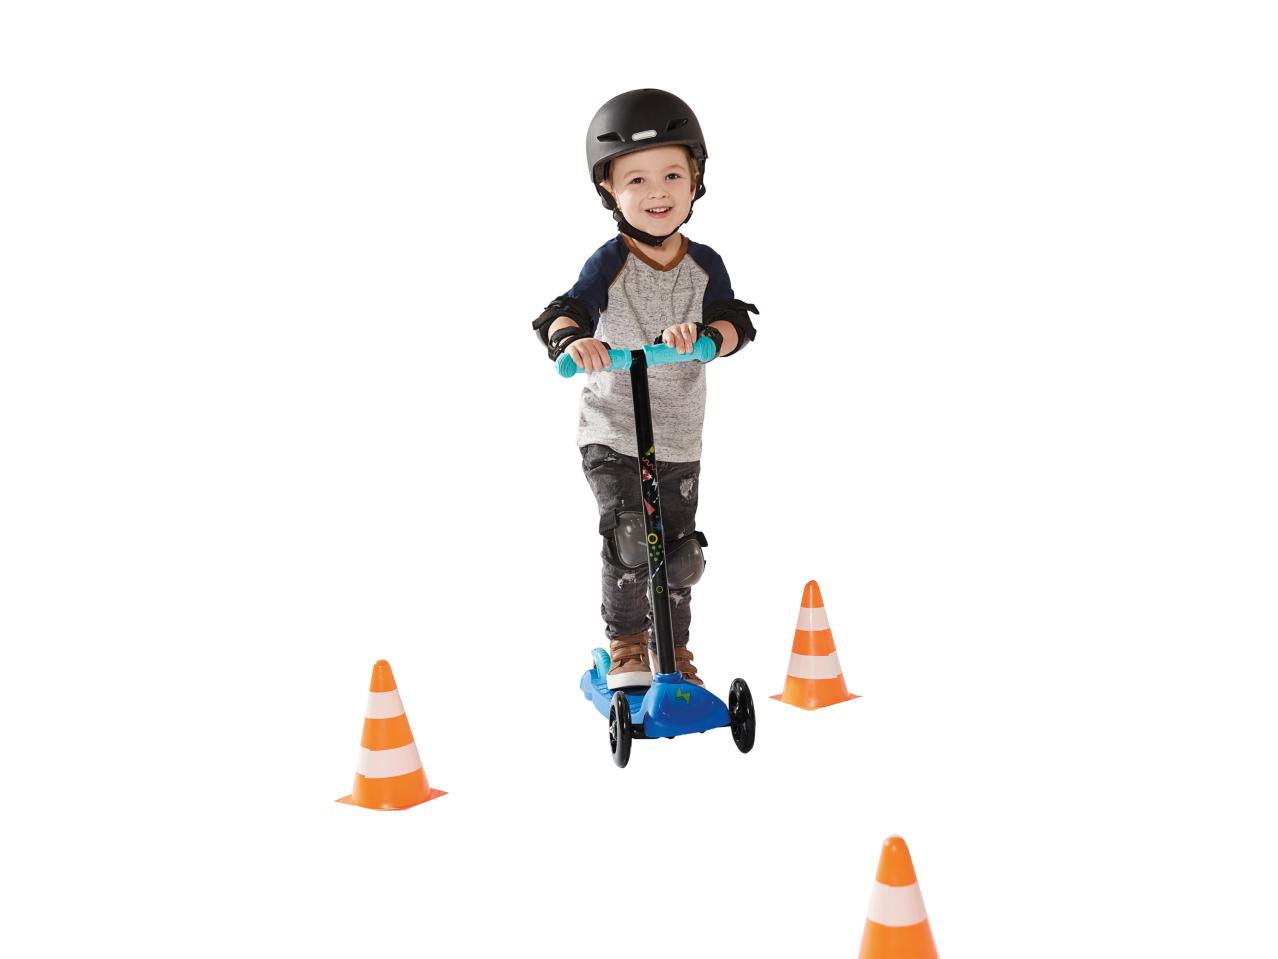 Playtive Junior Kids' Scooter or Tri-Scooter1